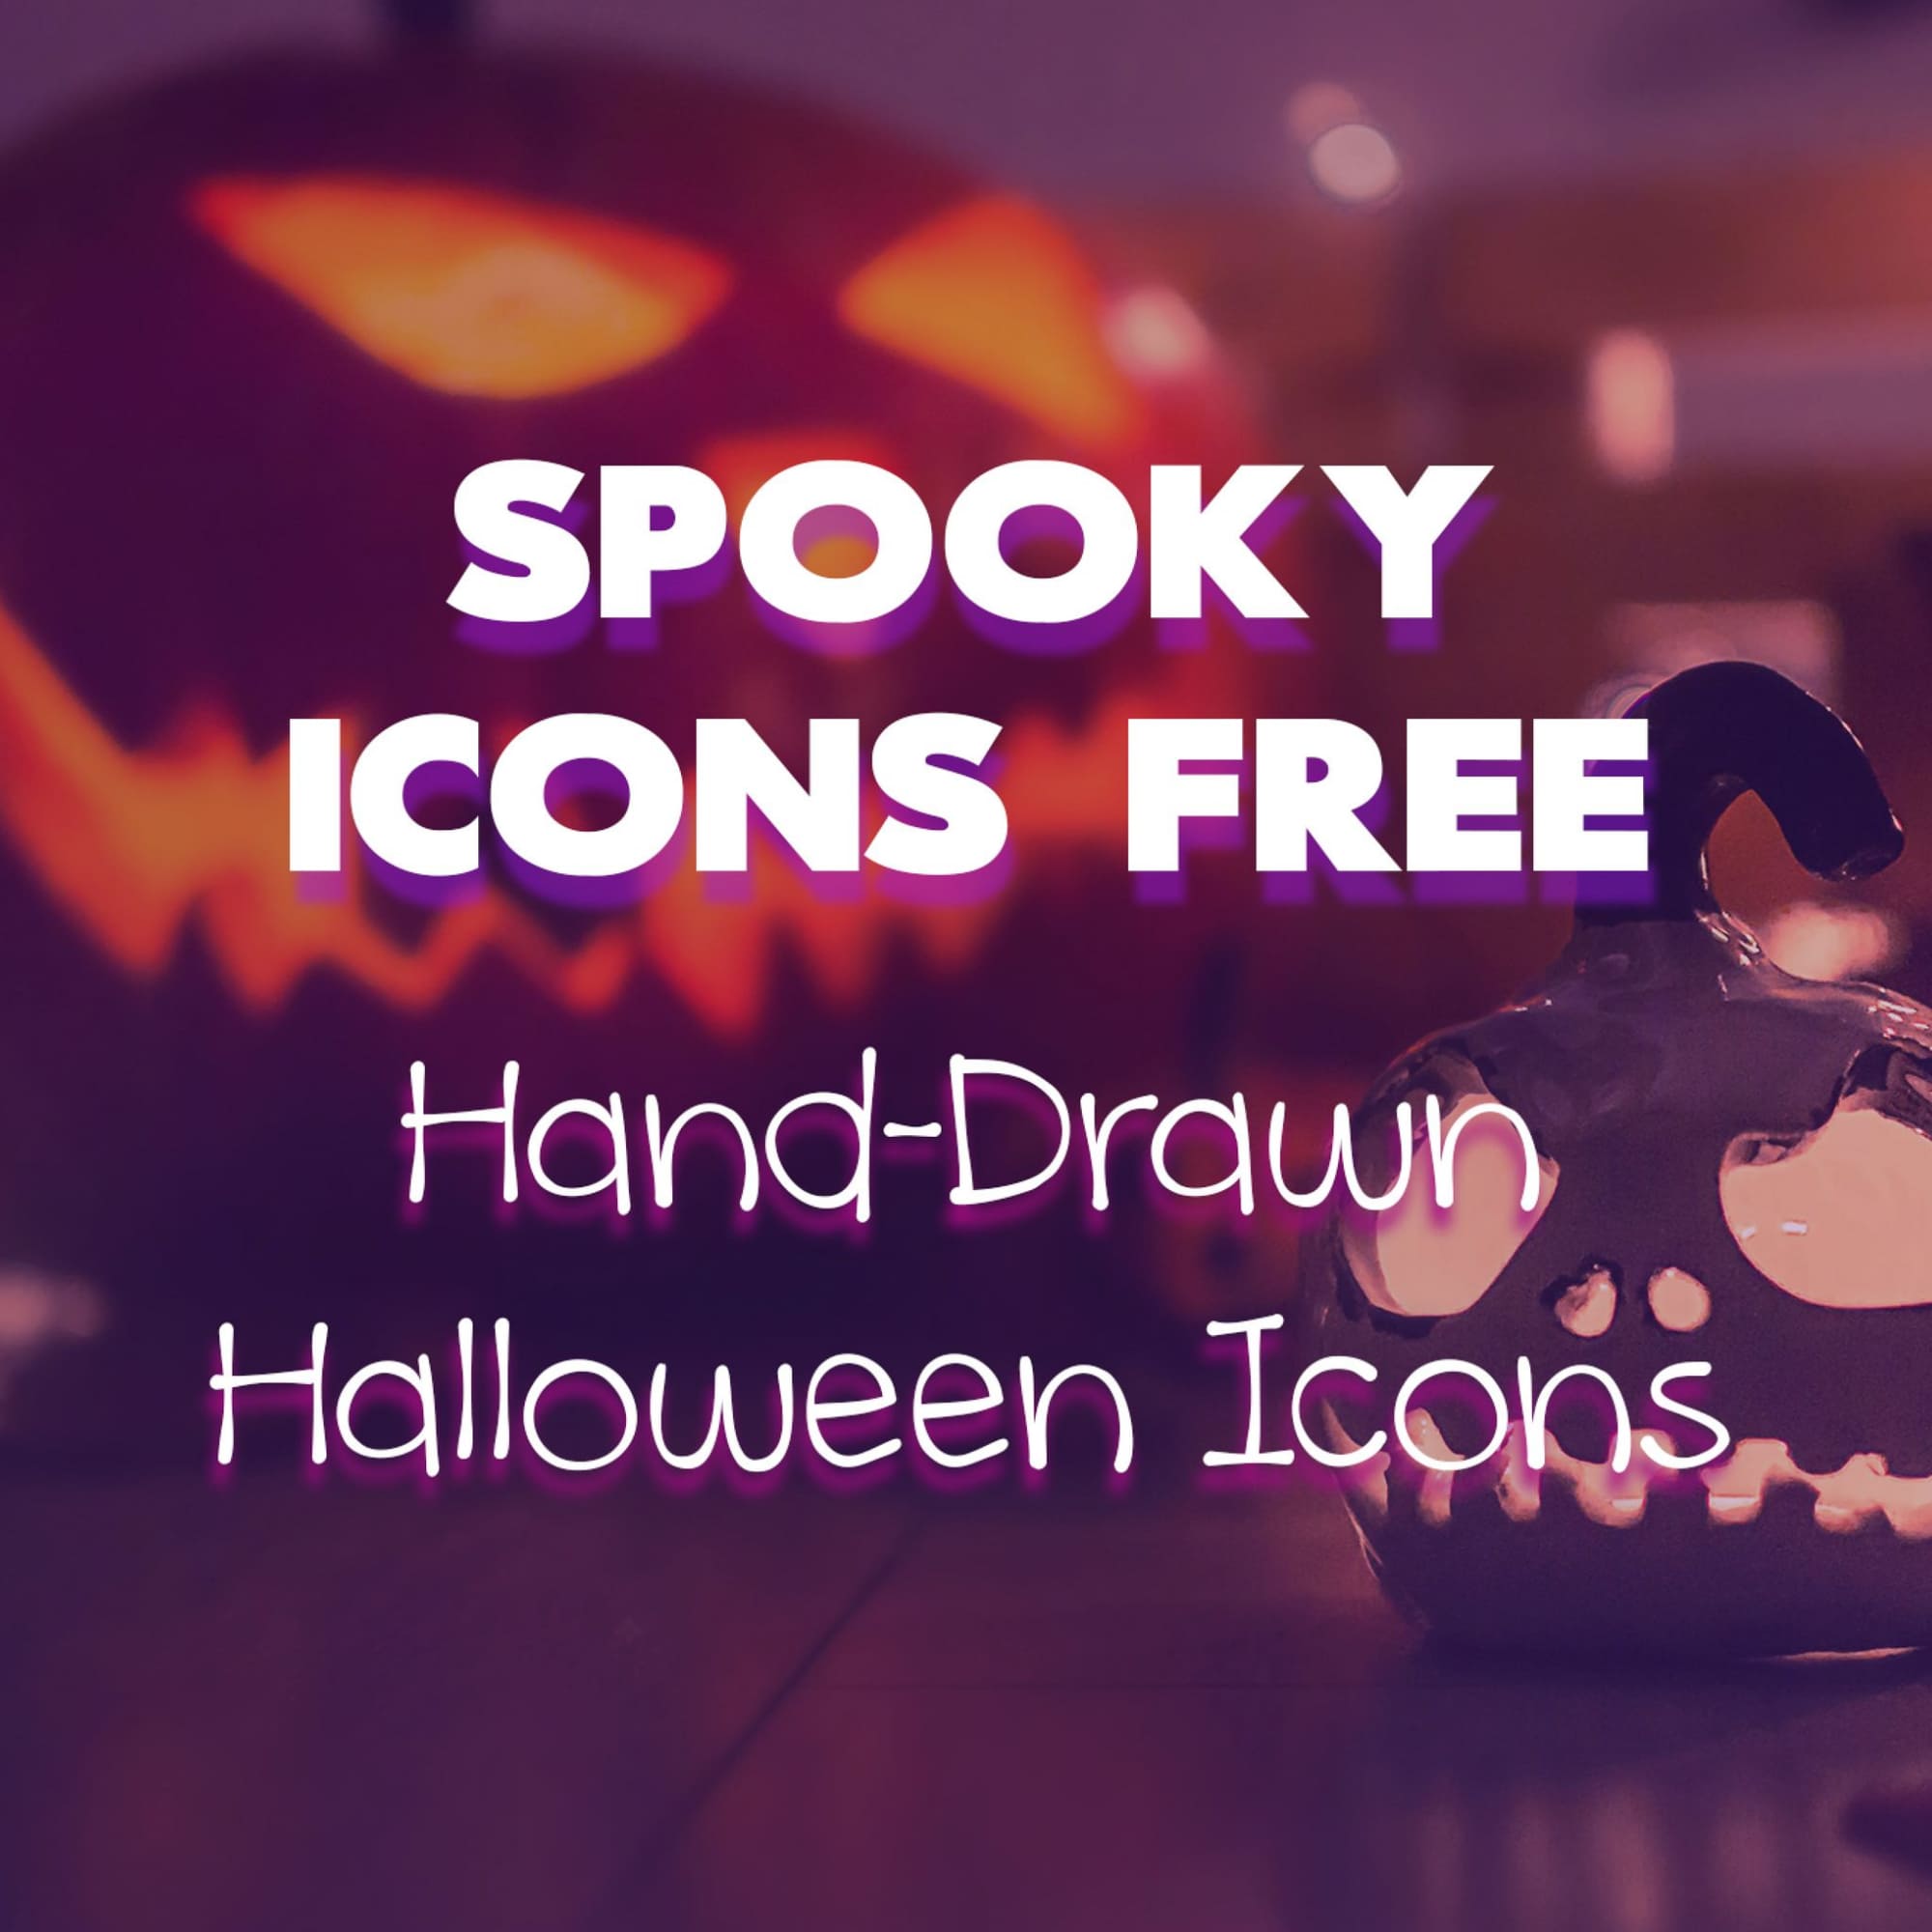 Spooky Icons Free.